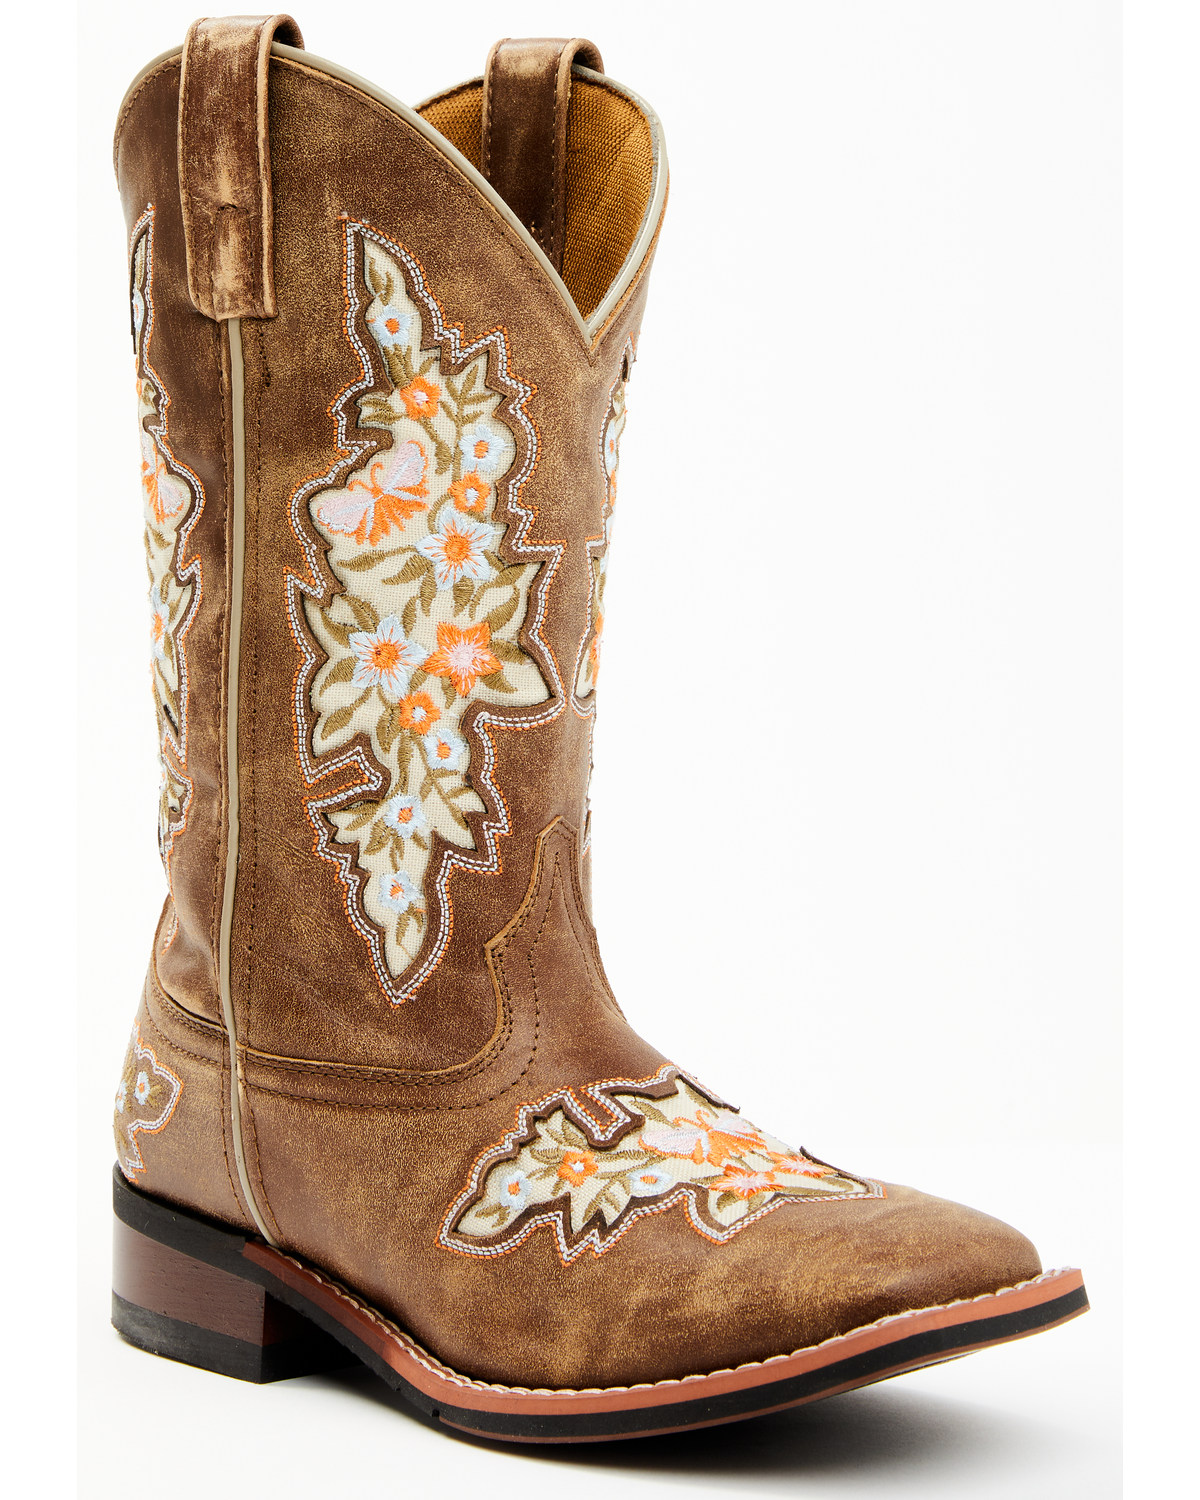 Laredo Women's Flower Inlay Western Performance Boots - Broad Square Toe